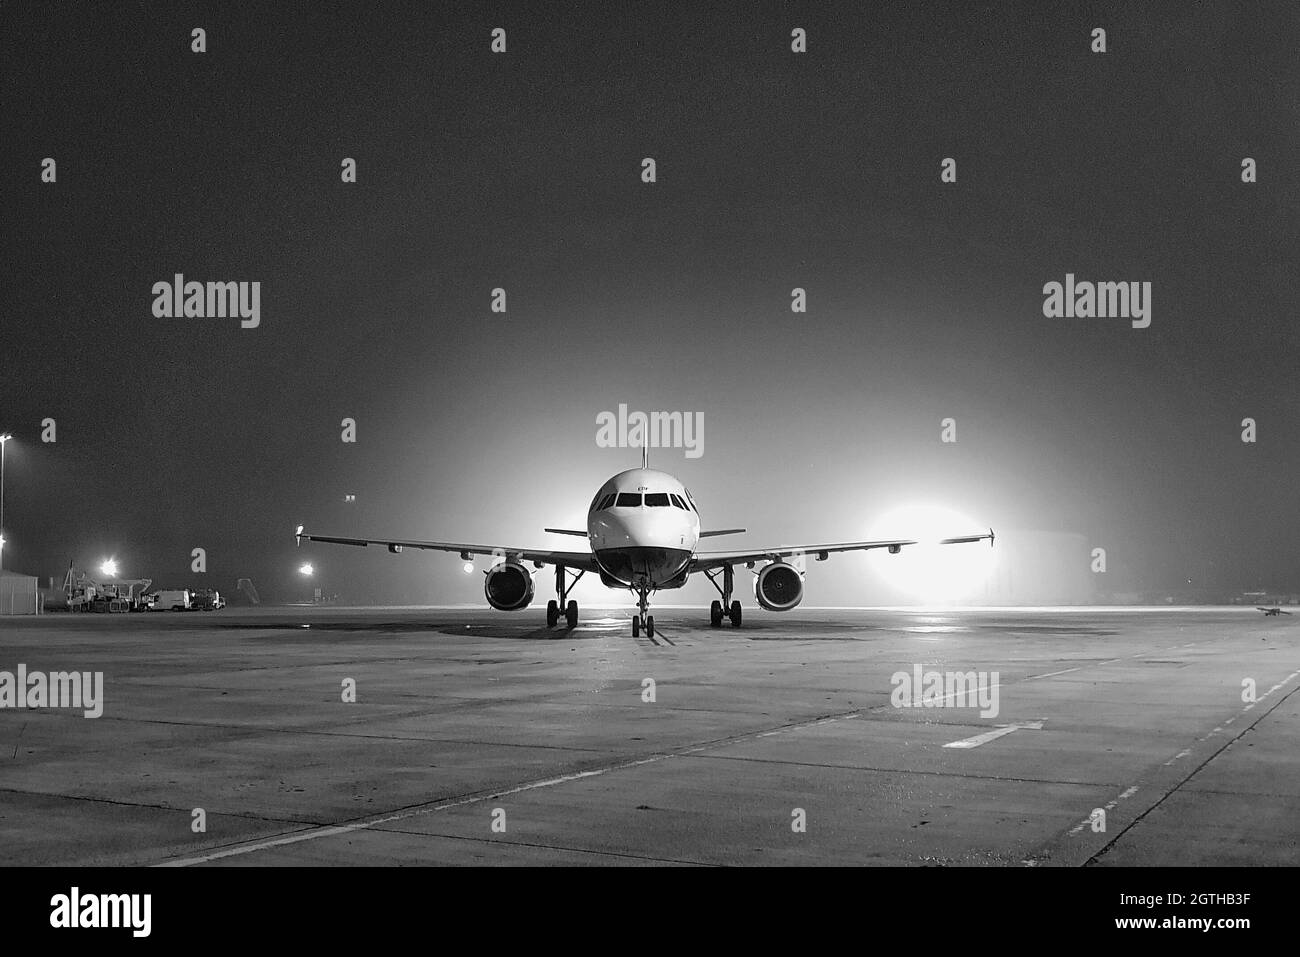 Airport runway night Black and White Stock Photos & Images - Alamy